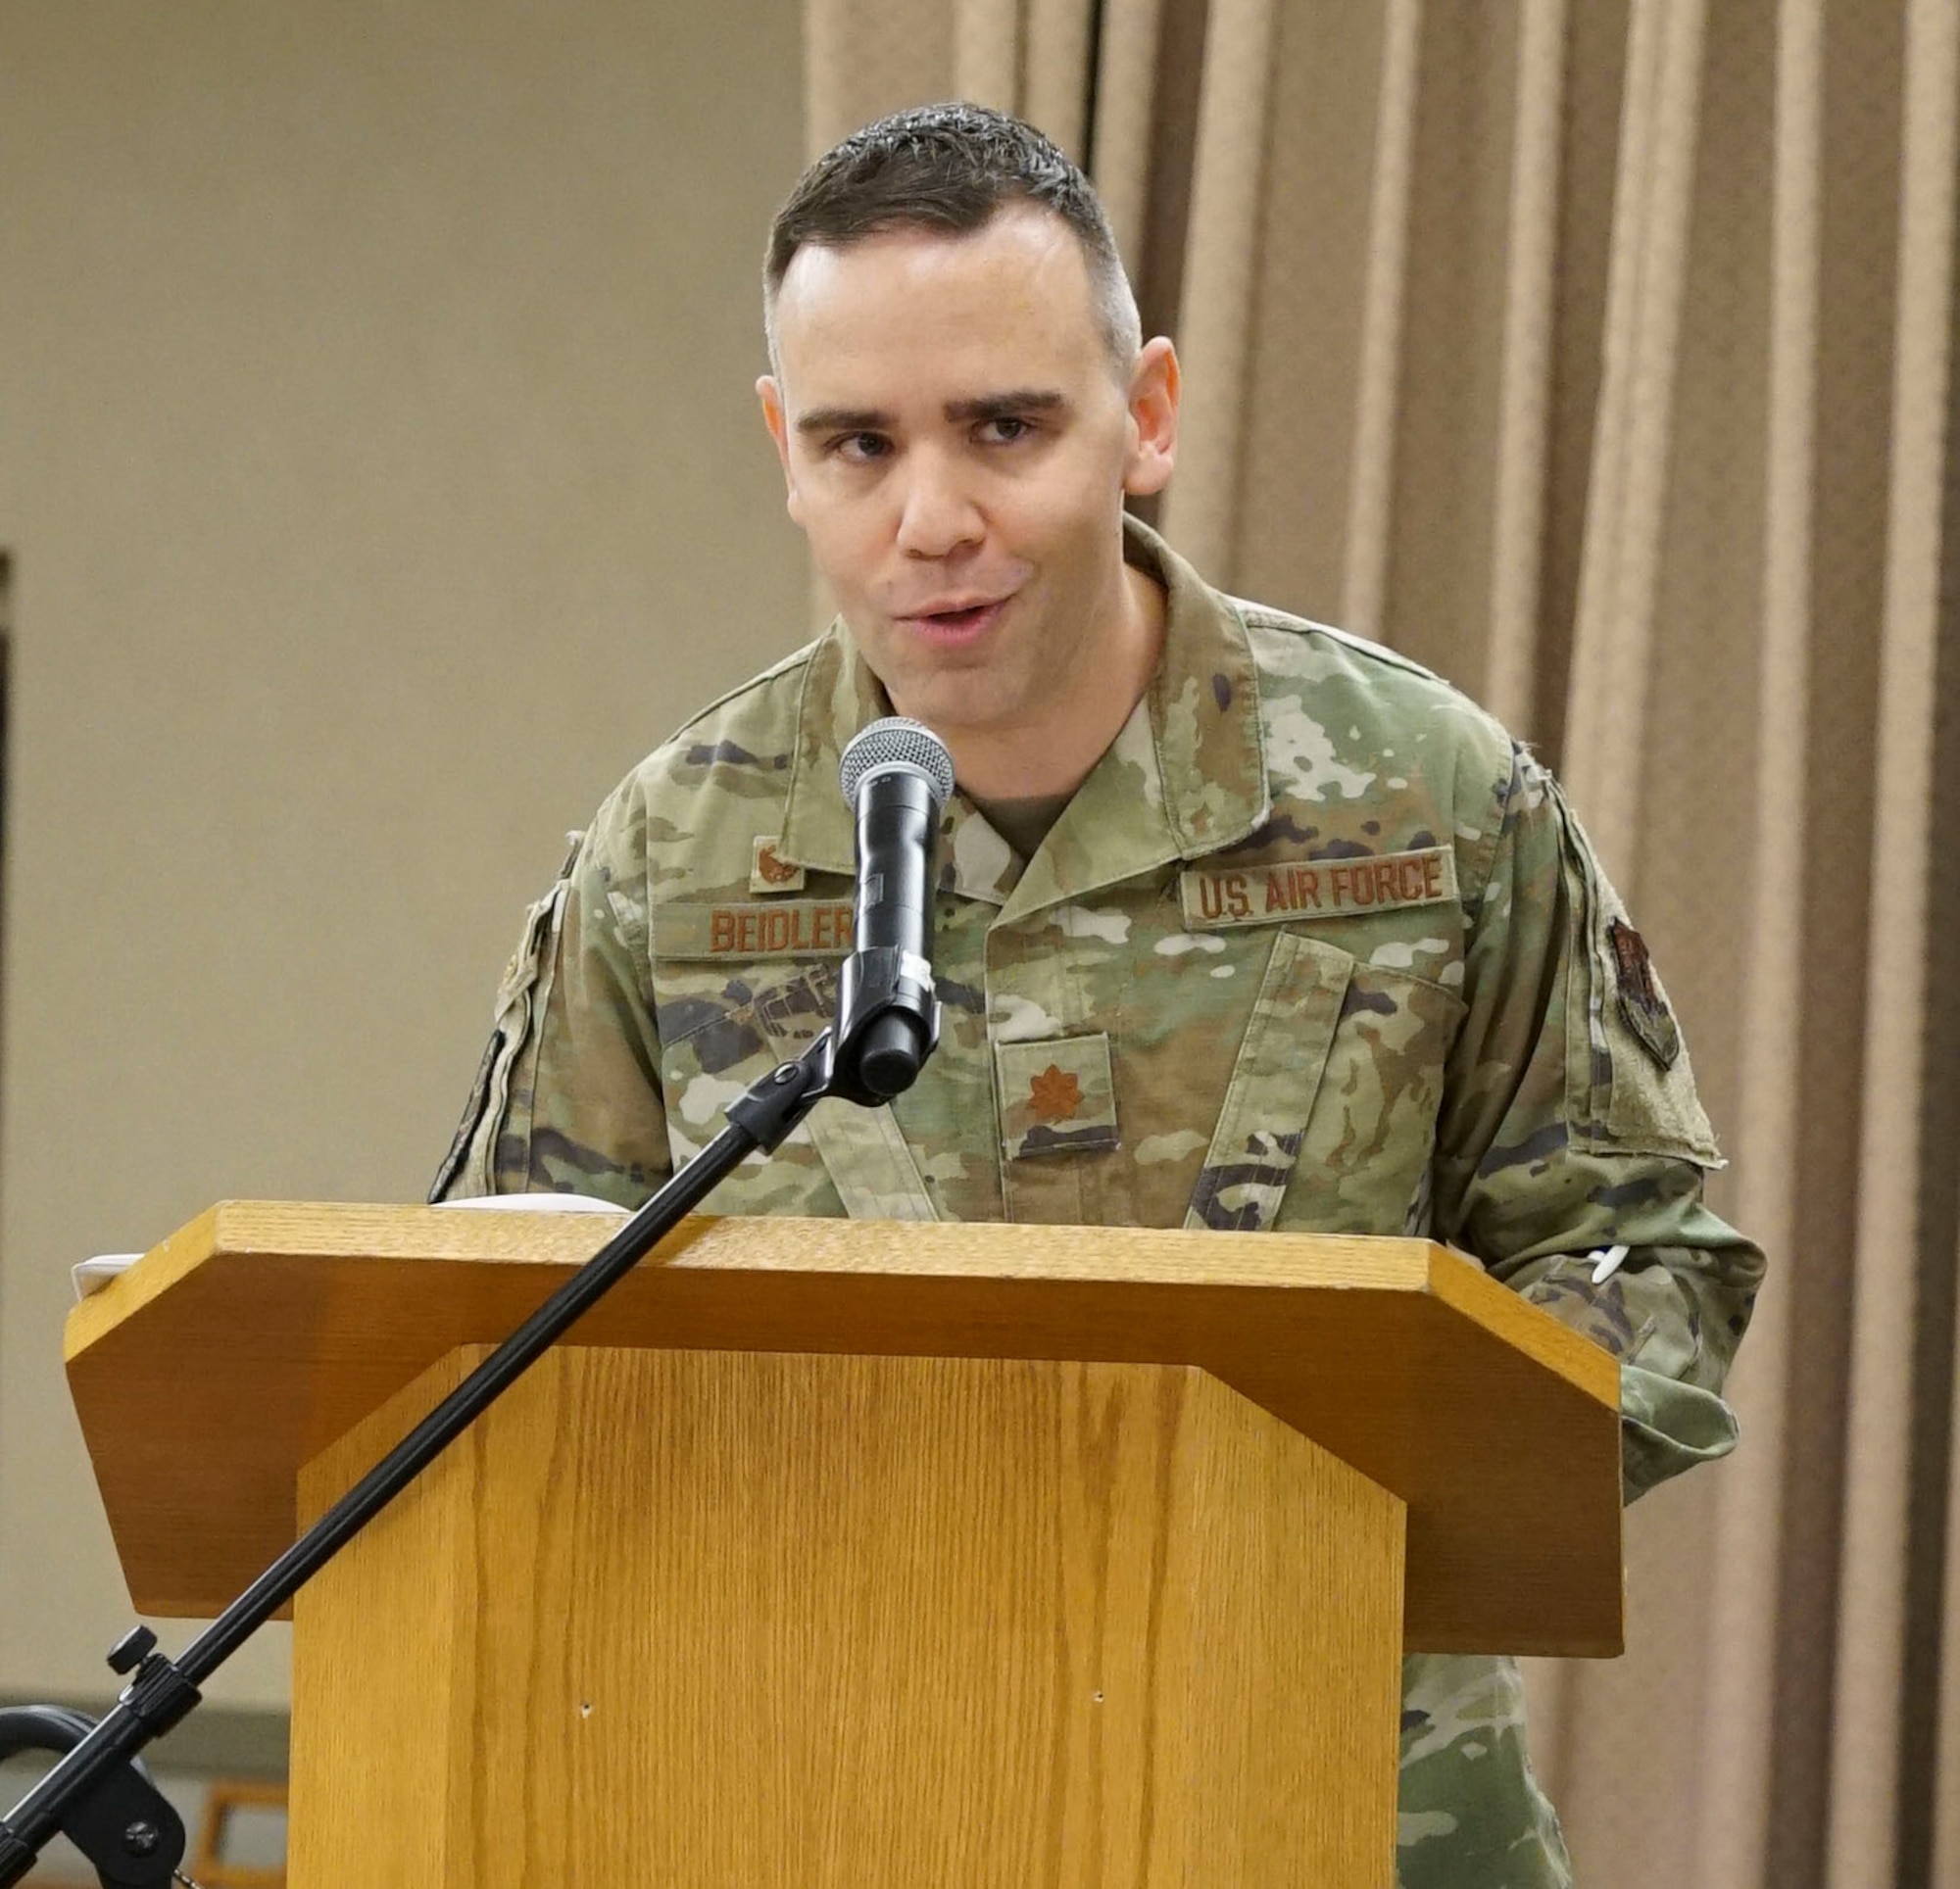 U.S. Air Force Maj. Andrew Beidler gives a speech at a podium.